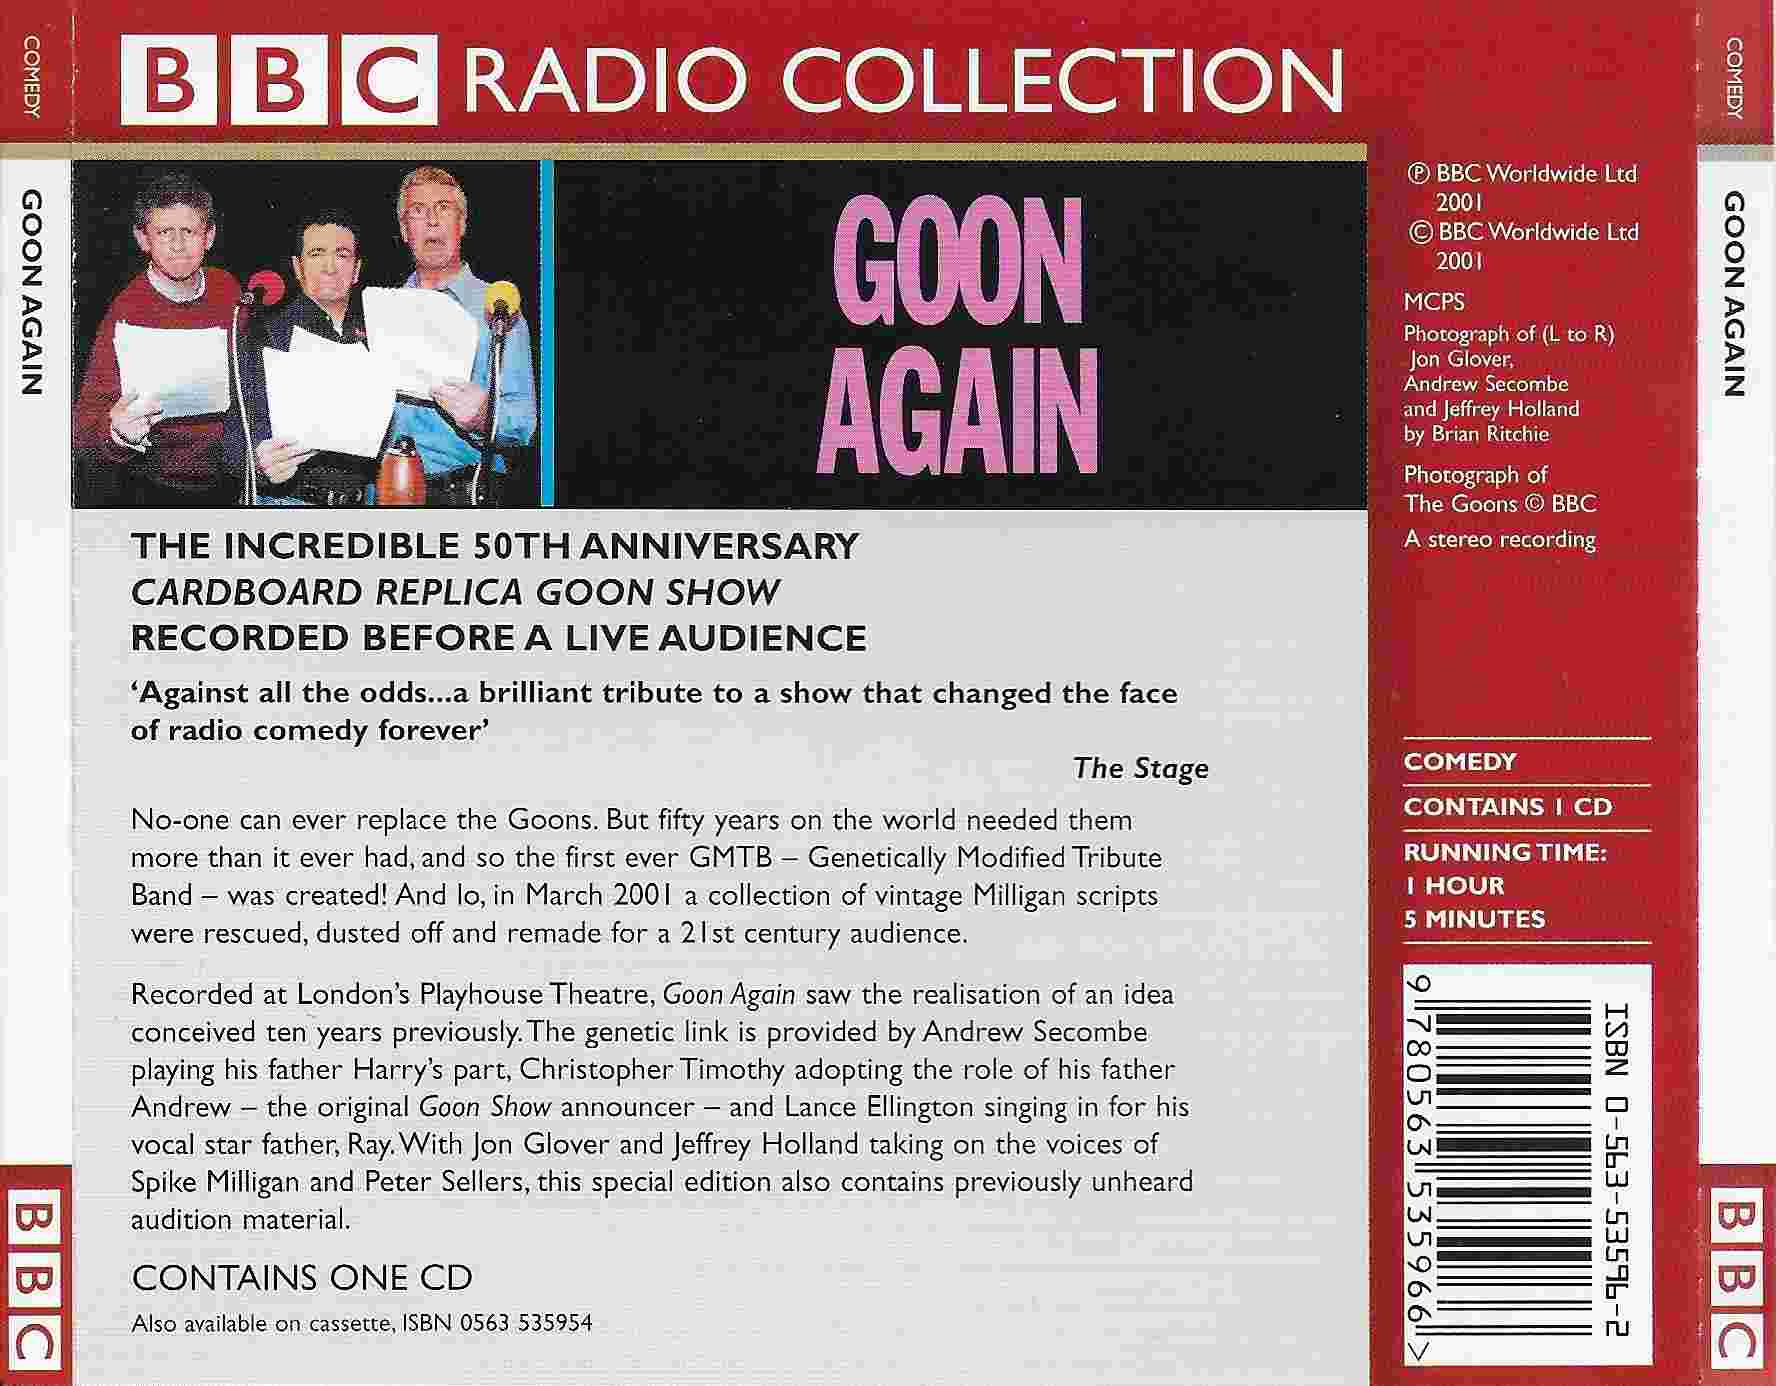 Picture of ISBN 0-563-53596-2 Goon again by artist Spike Milligan / Larry Stephens from the BBC records and Tapes library